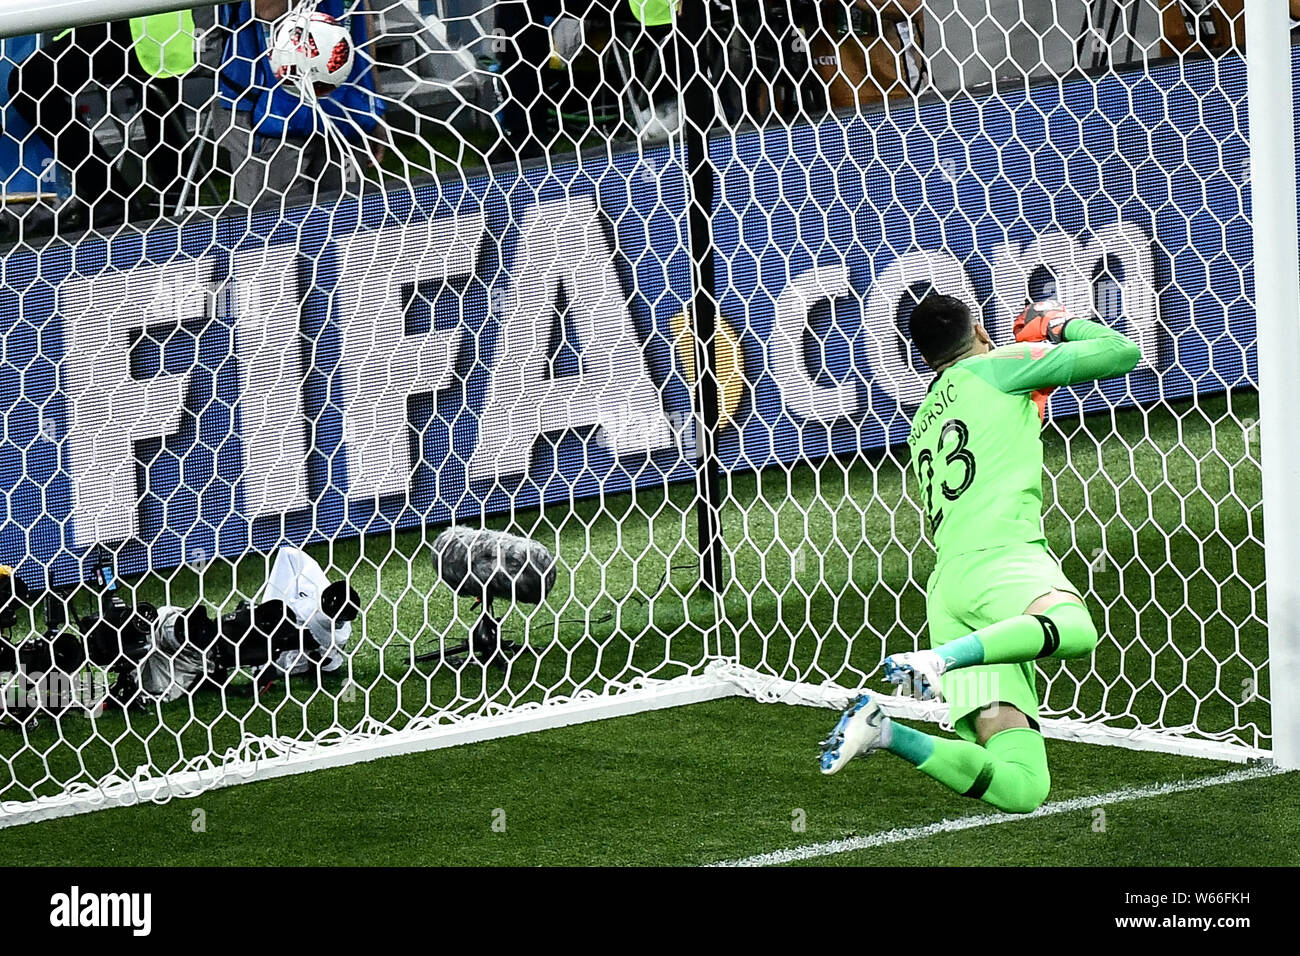 Goalkeeper Danijel Subasic of Croatia fails to save the goal by Kieran Trippier of England in their semifinal match during the 2018 FIFA World Cup in Stock Photo